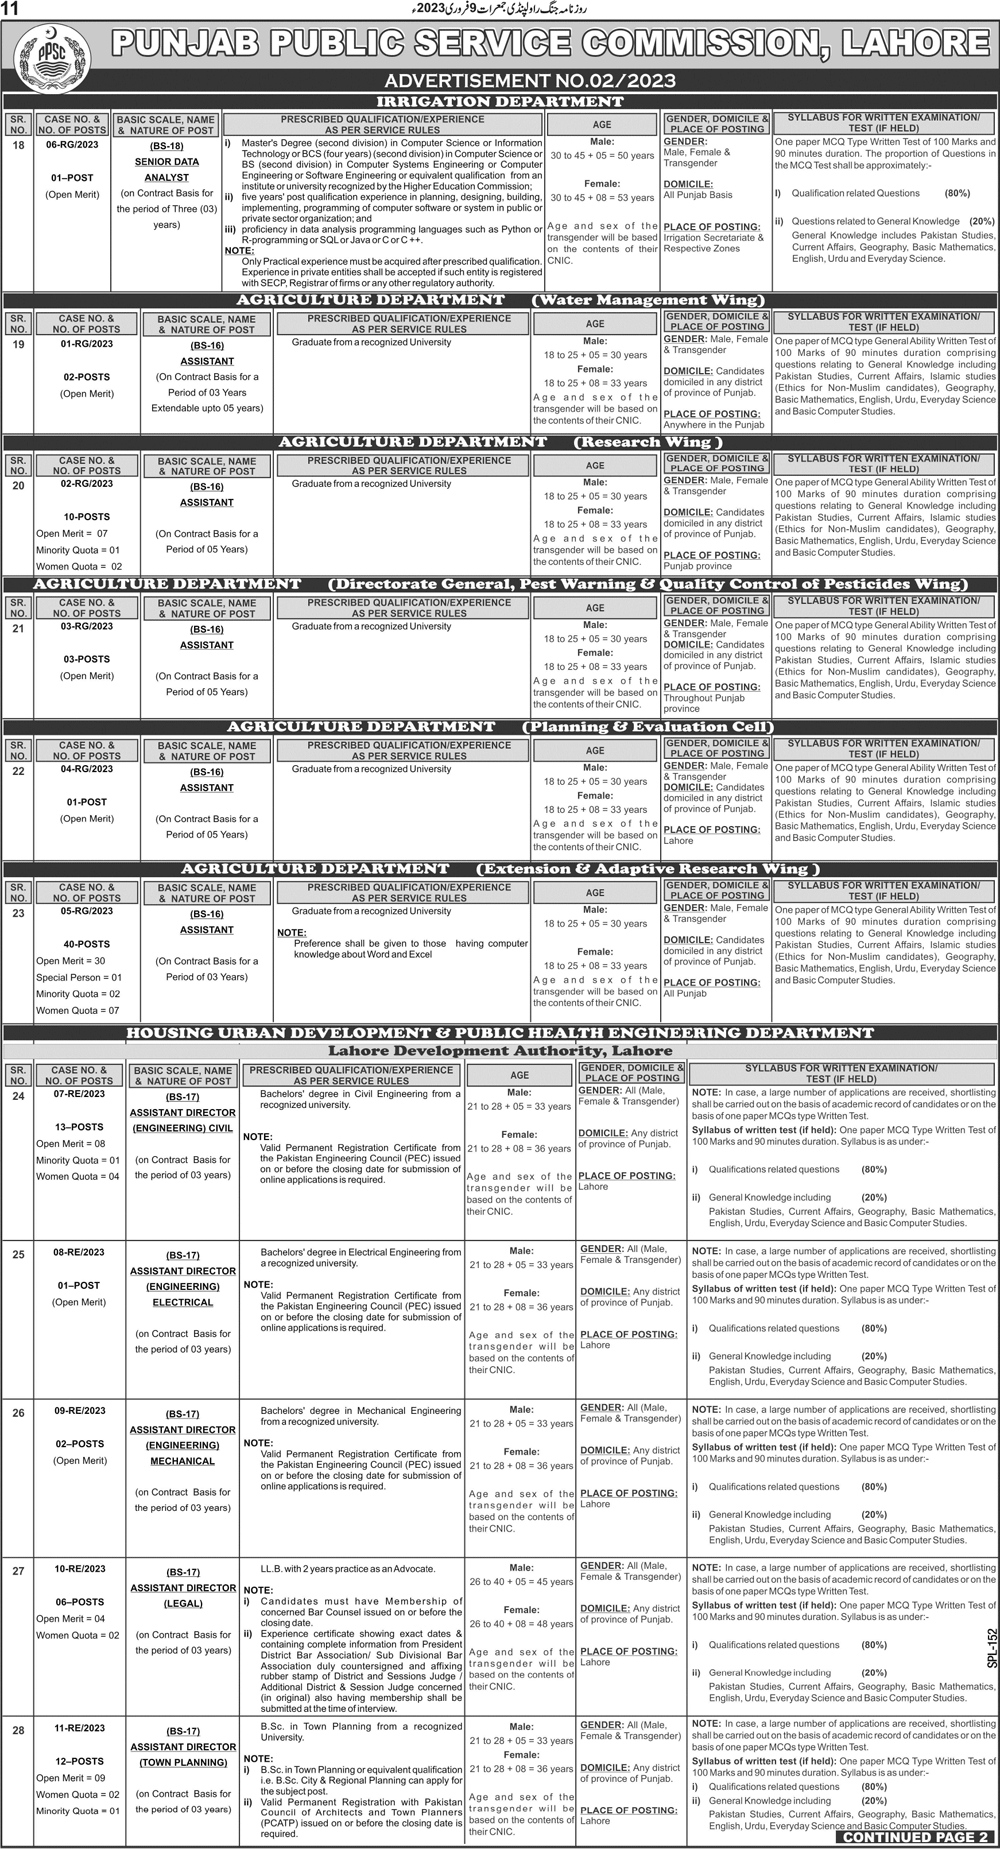 The Latest PPSC Vacancies 2023 Ad No. 02/2023